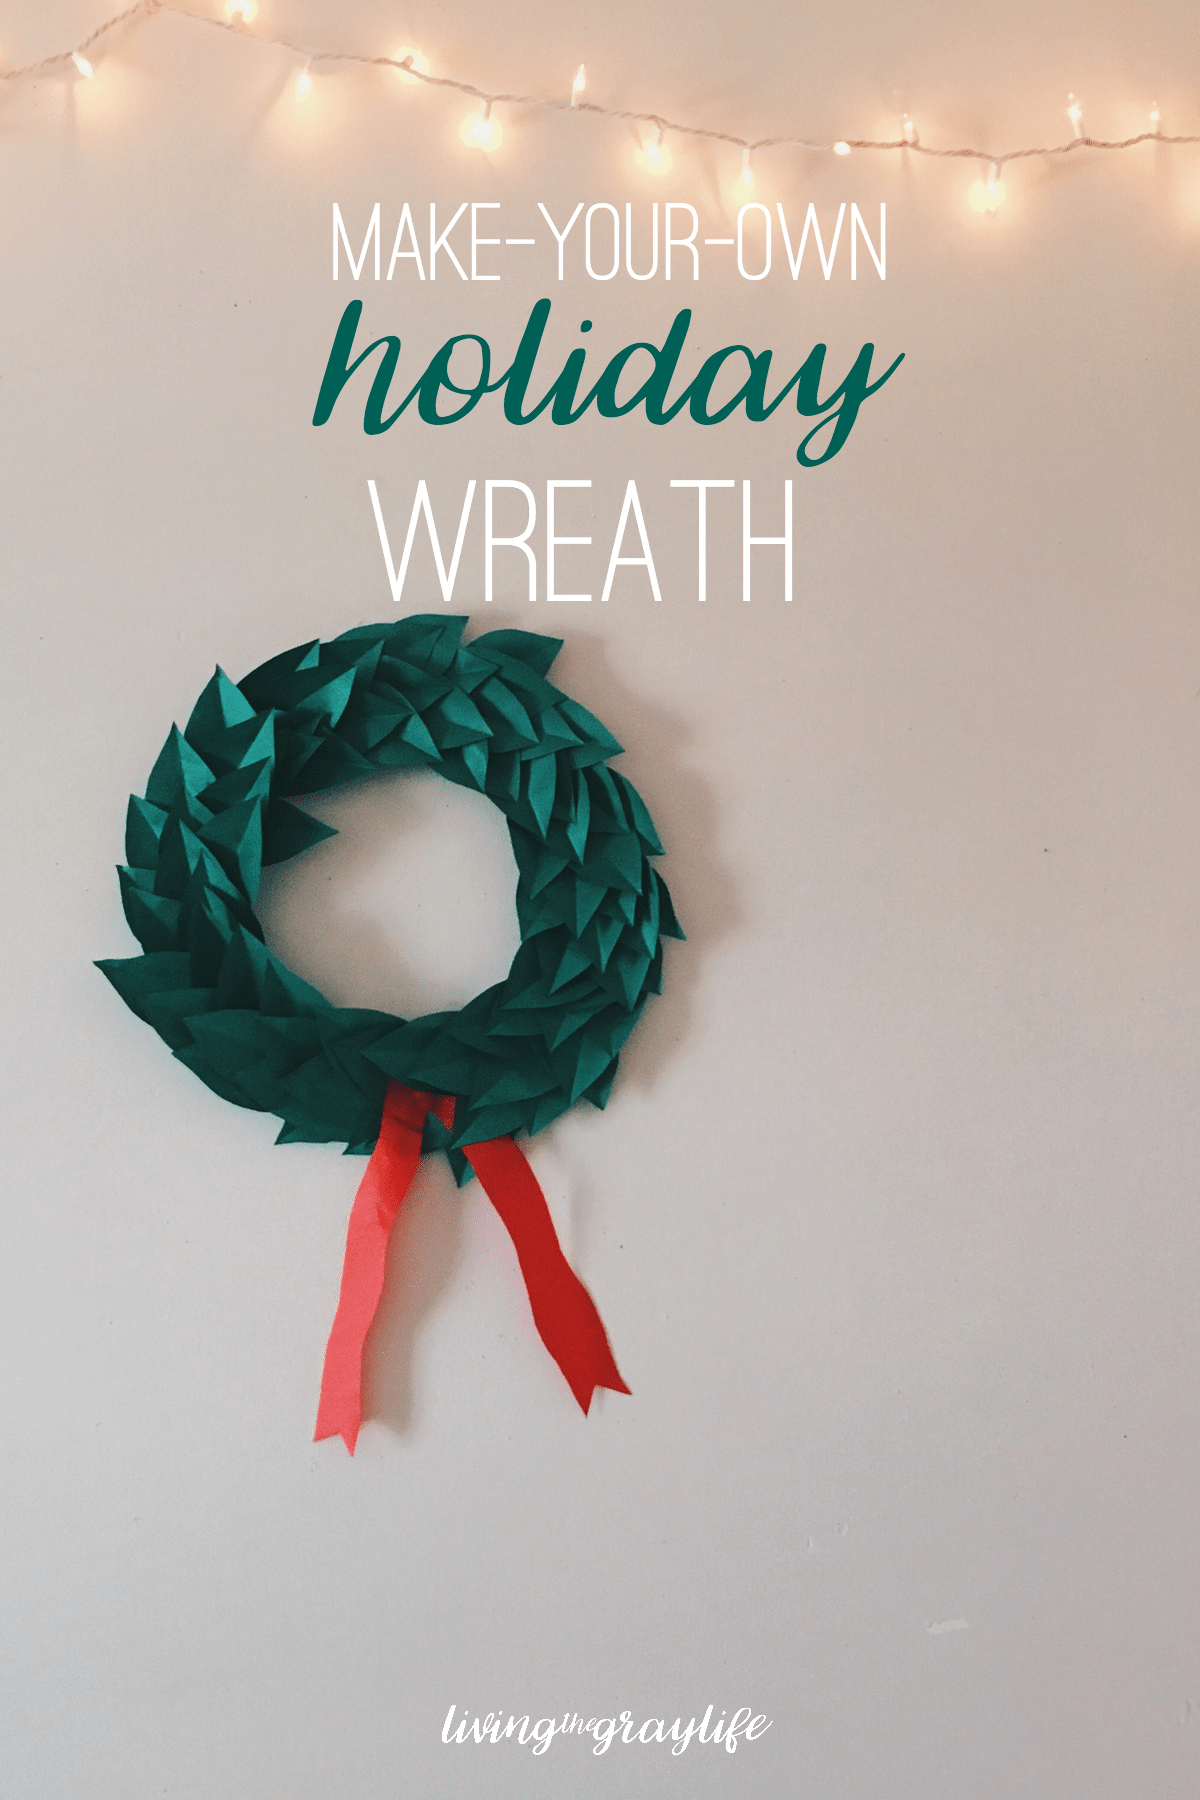 Make Your Own Paper Wreath for the Holidays